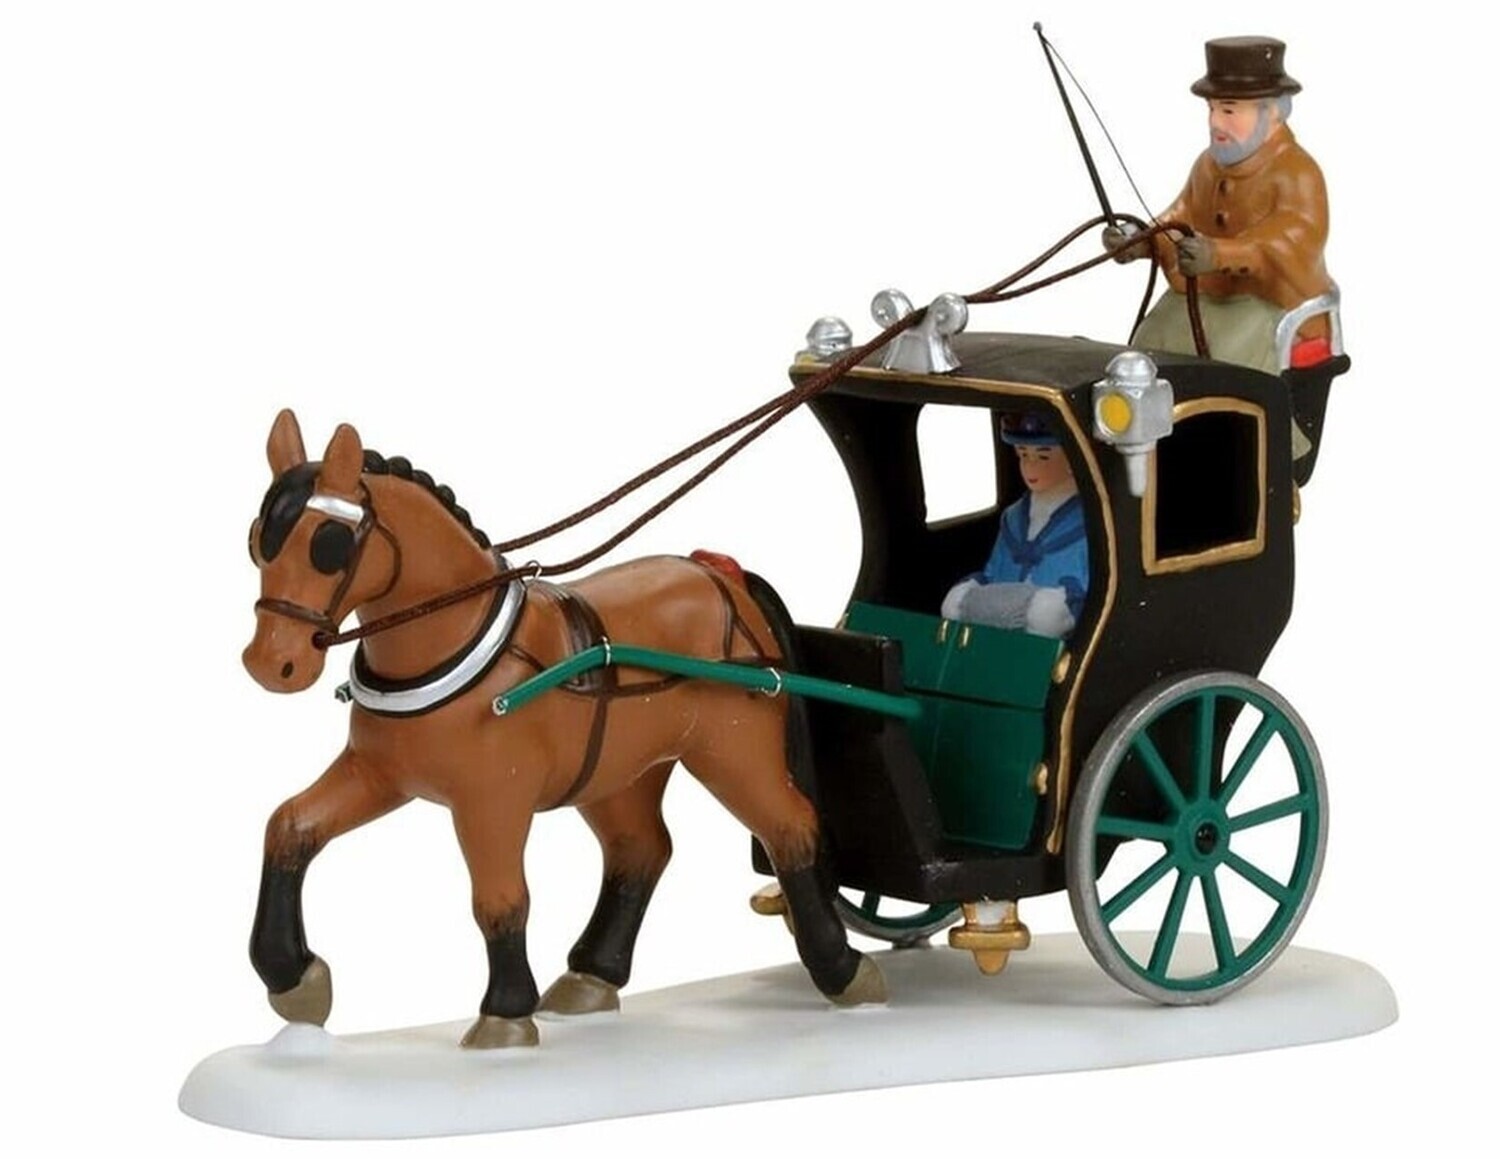 Department 56 Dicken's Village "Holiday Cab Ride" Horse & Buggy Figurine (4056638)